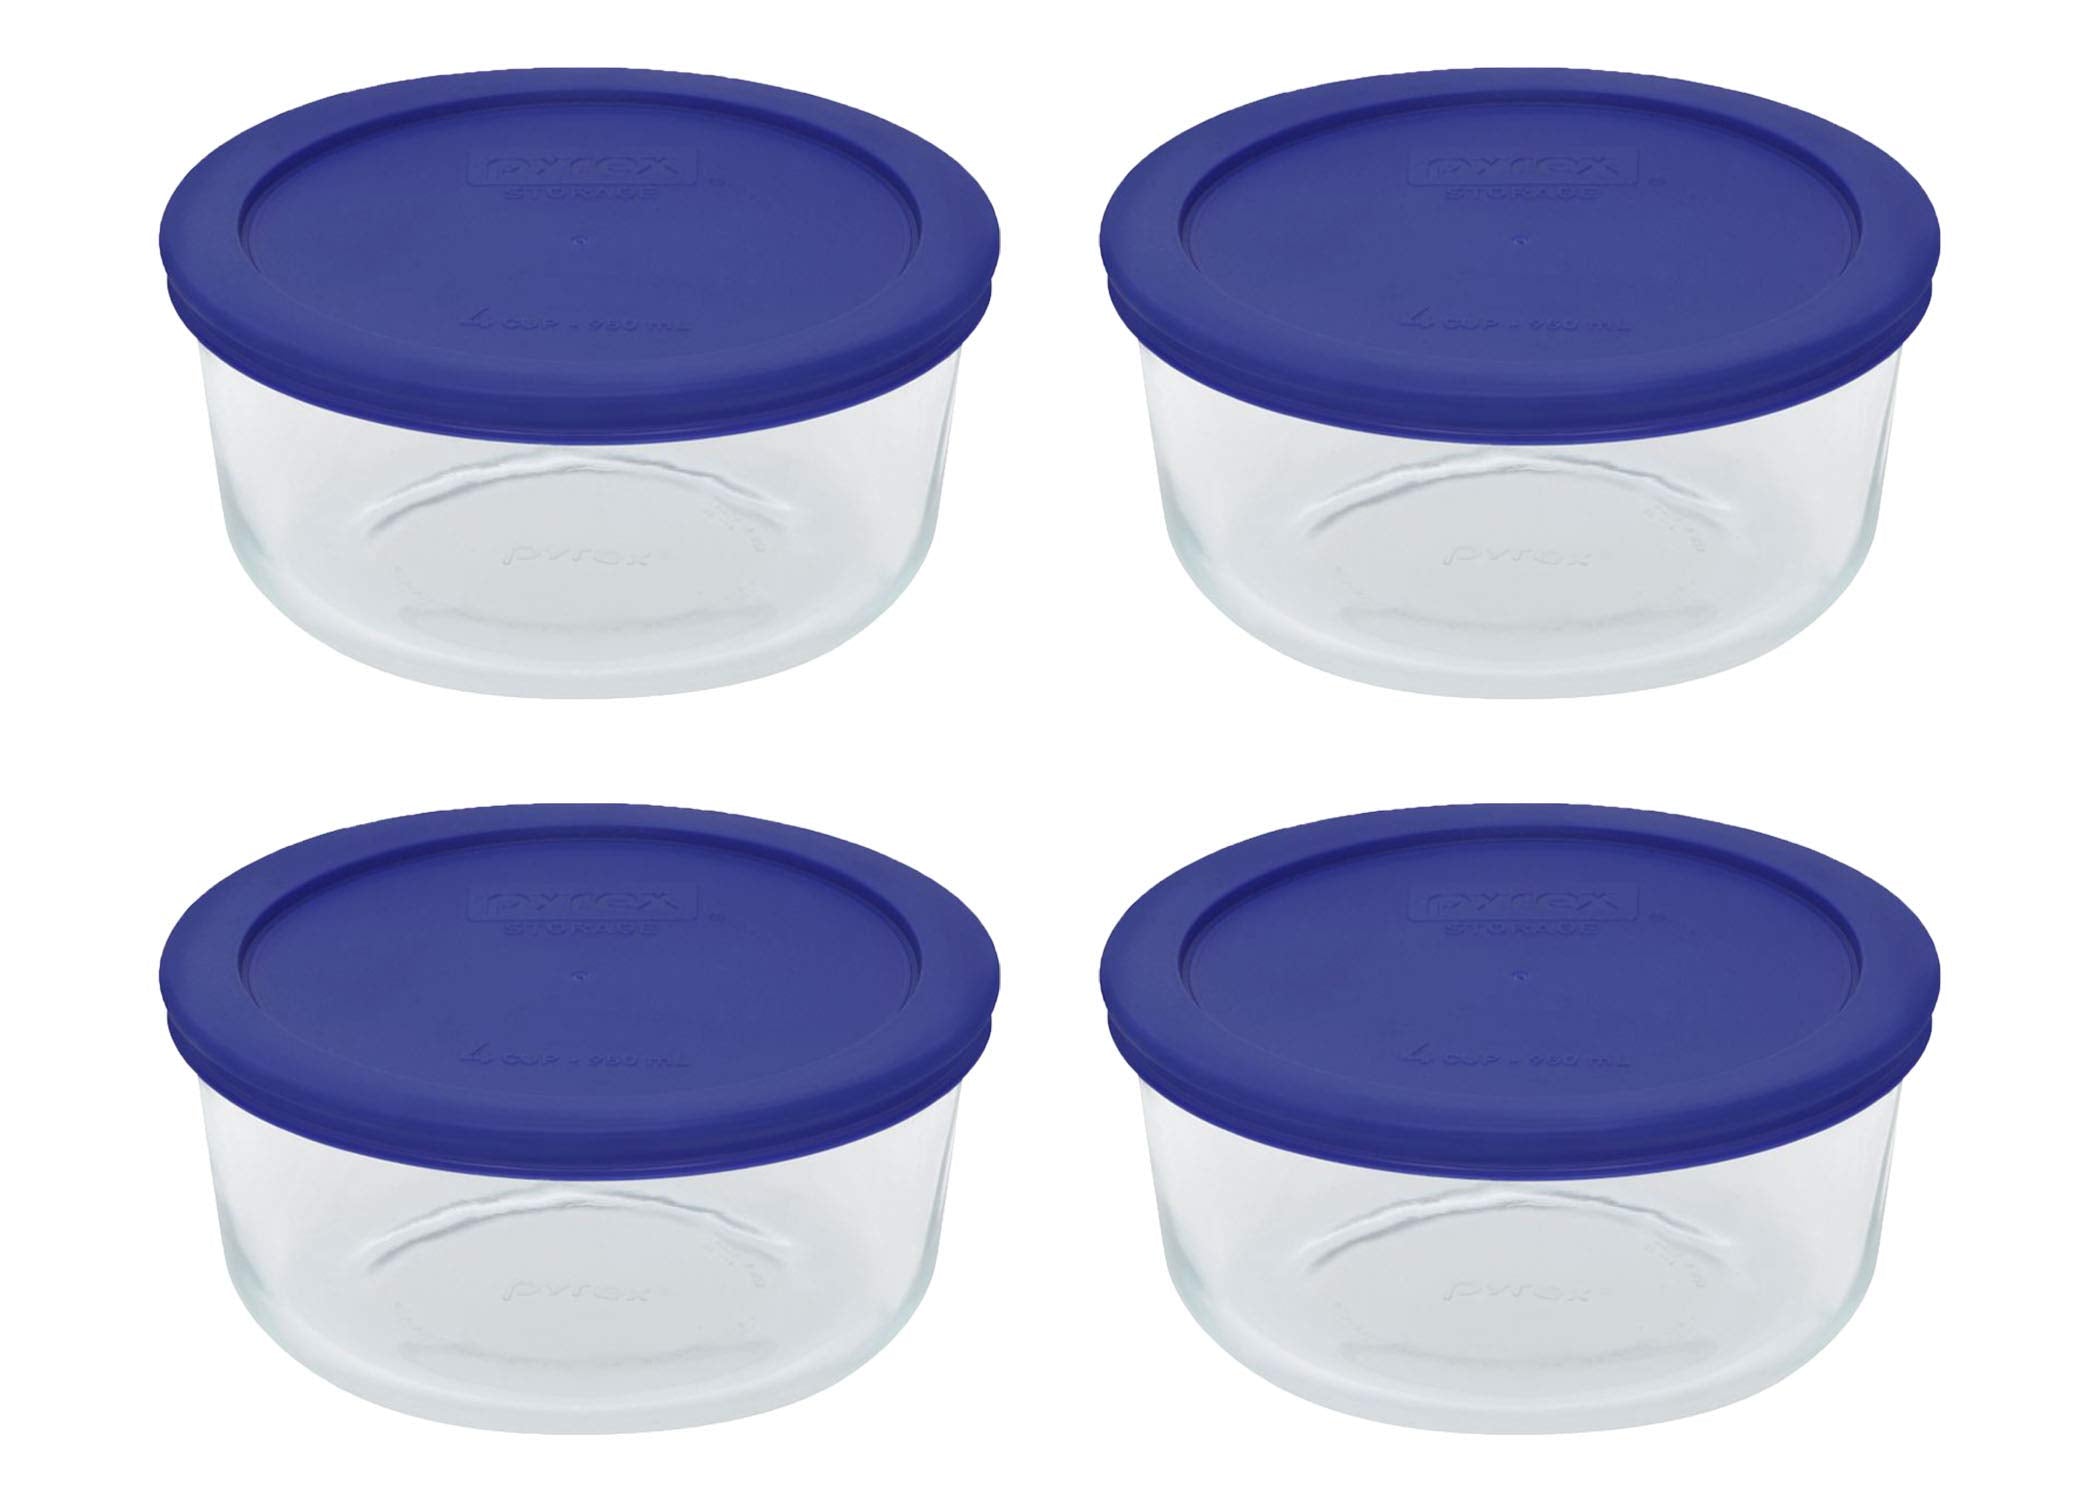  Pyrex Storage 2 Cup Round Dish, Clear with Red & Blue